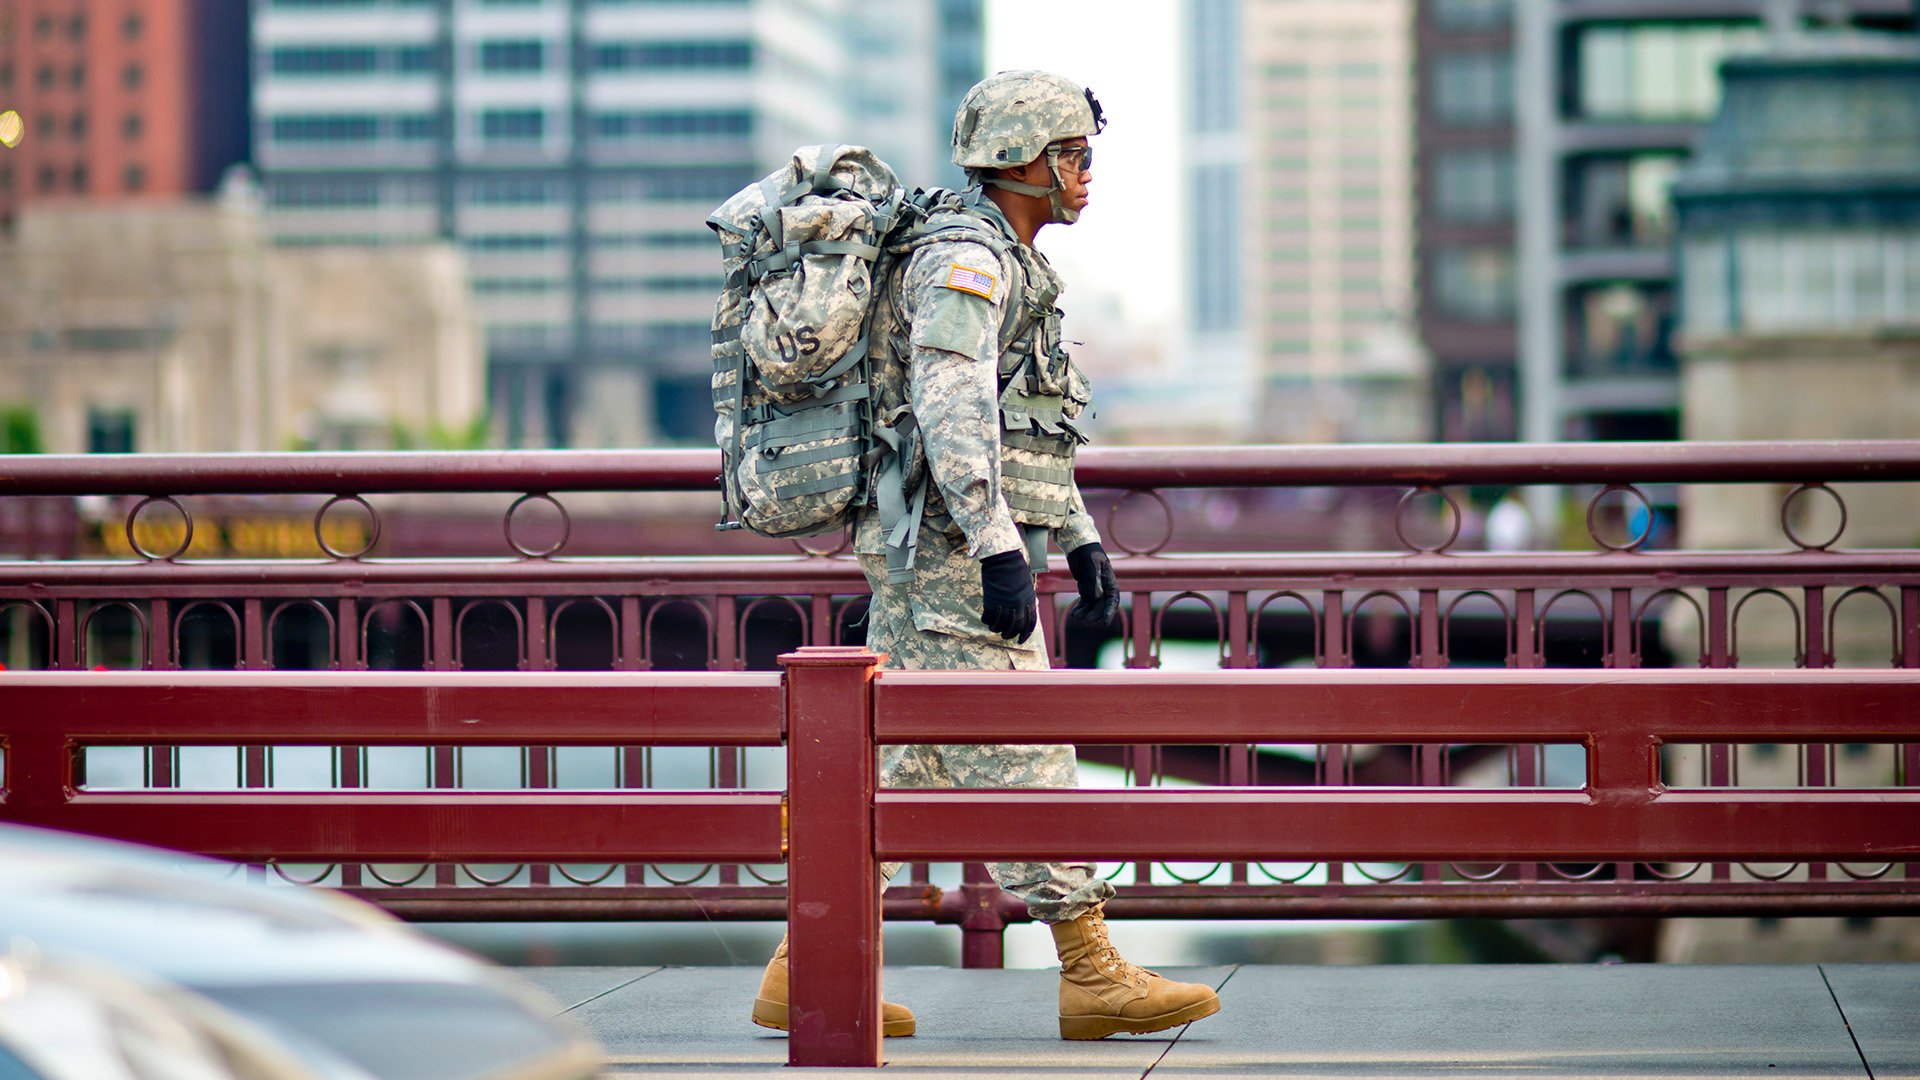 An Army Reserve Soldier with the 416th Theater Engineer Command, walks along a bridge July 29, 2014, in downtown Chicago, Illinois. US Army photo by Sgt. 1st Class Michel Sauret.